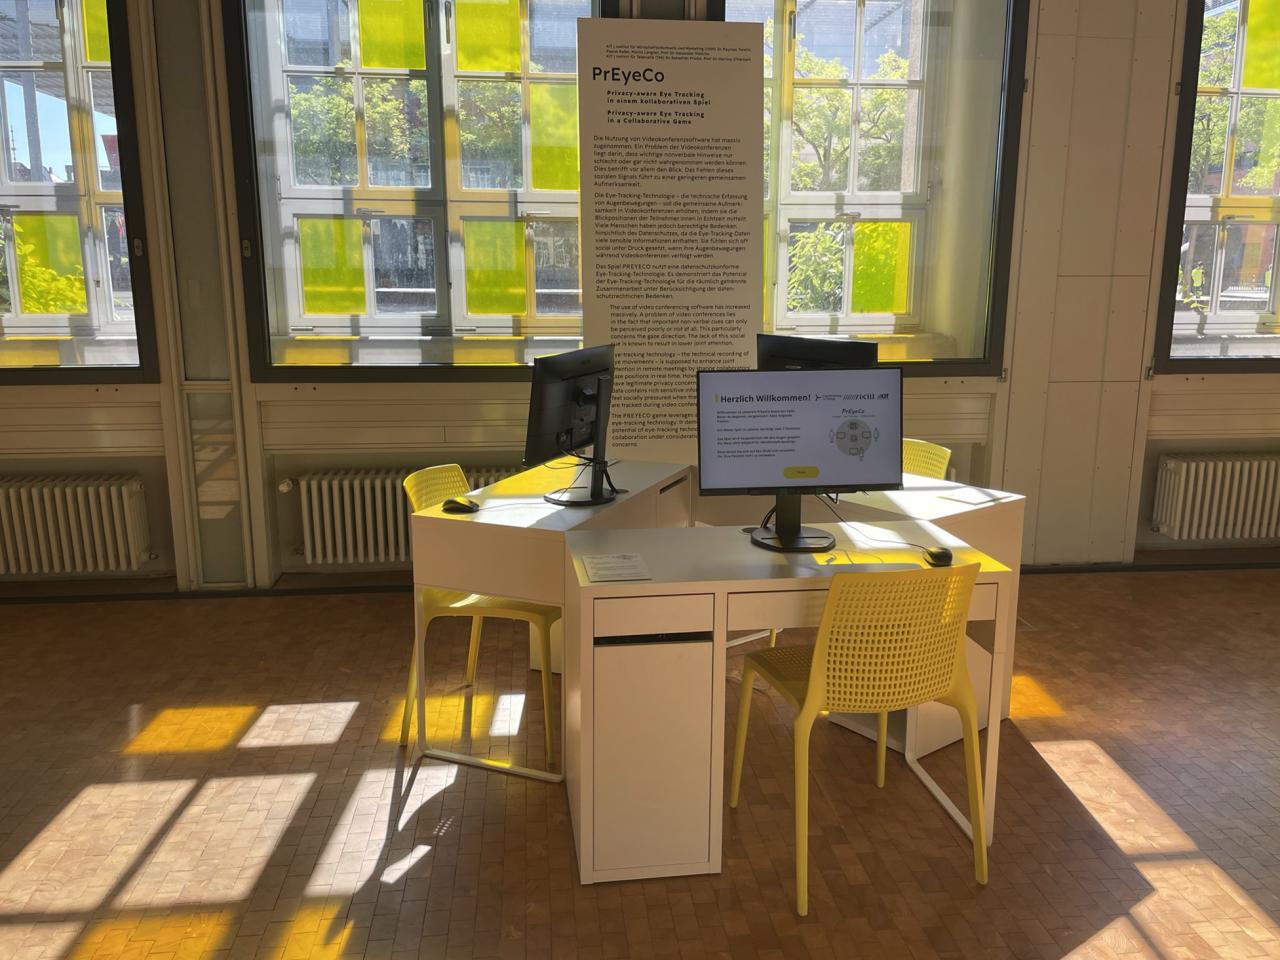 Exhibition view of the object PrEyeCo; three desks with computers and yellow chairs